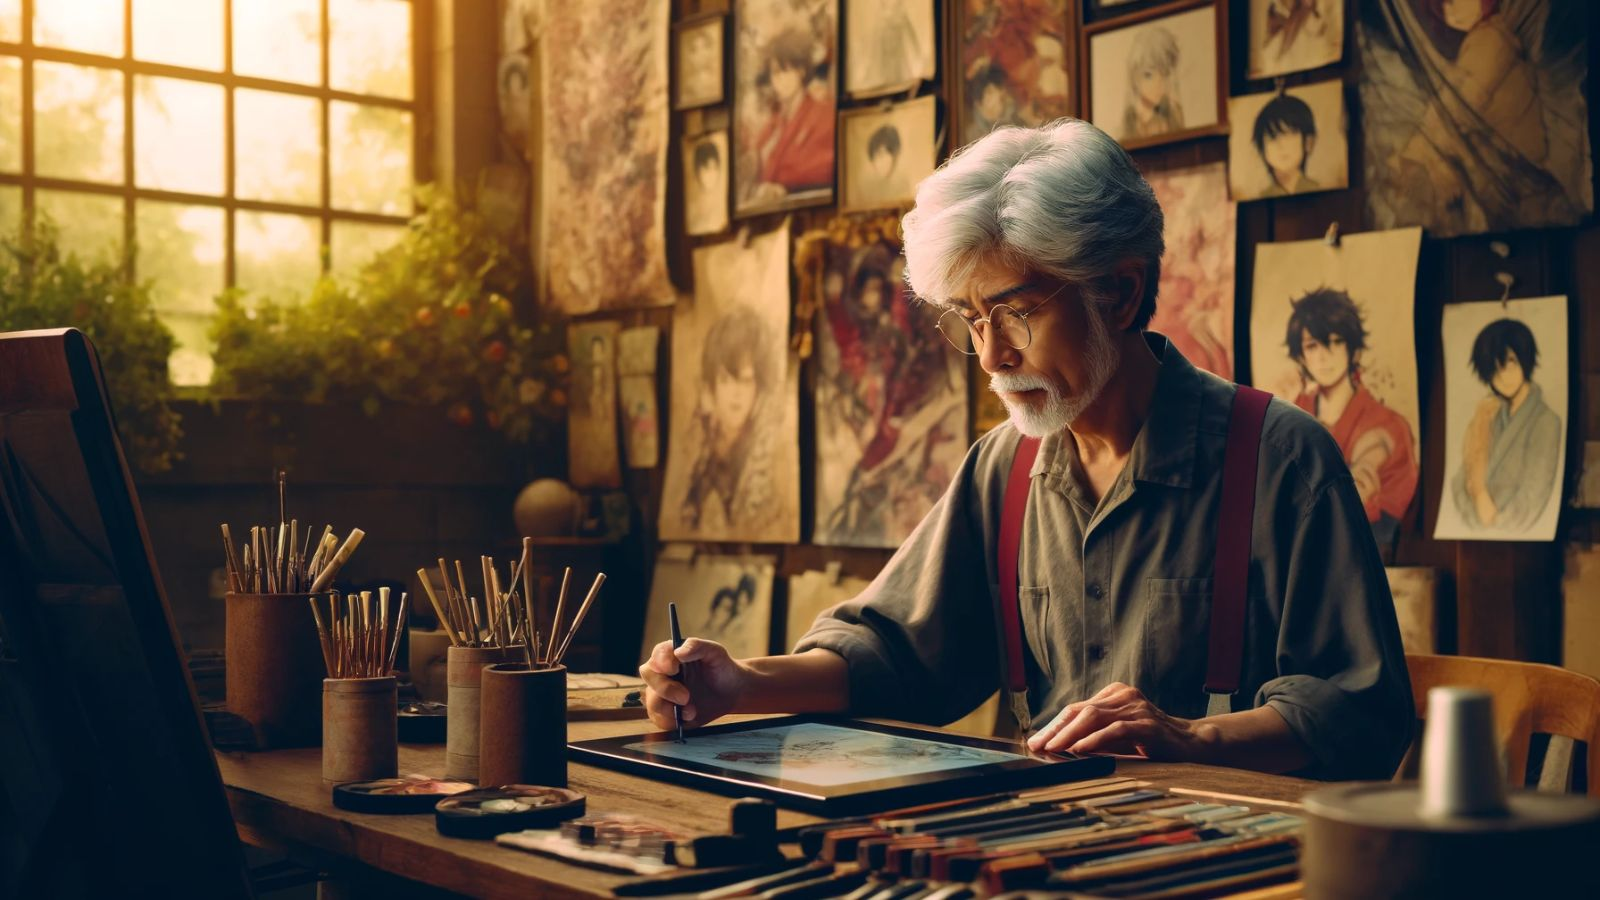 Anime artist who is already a master of drawing anime characters